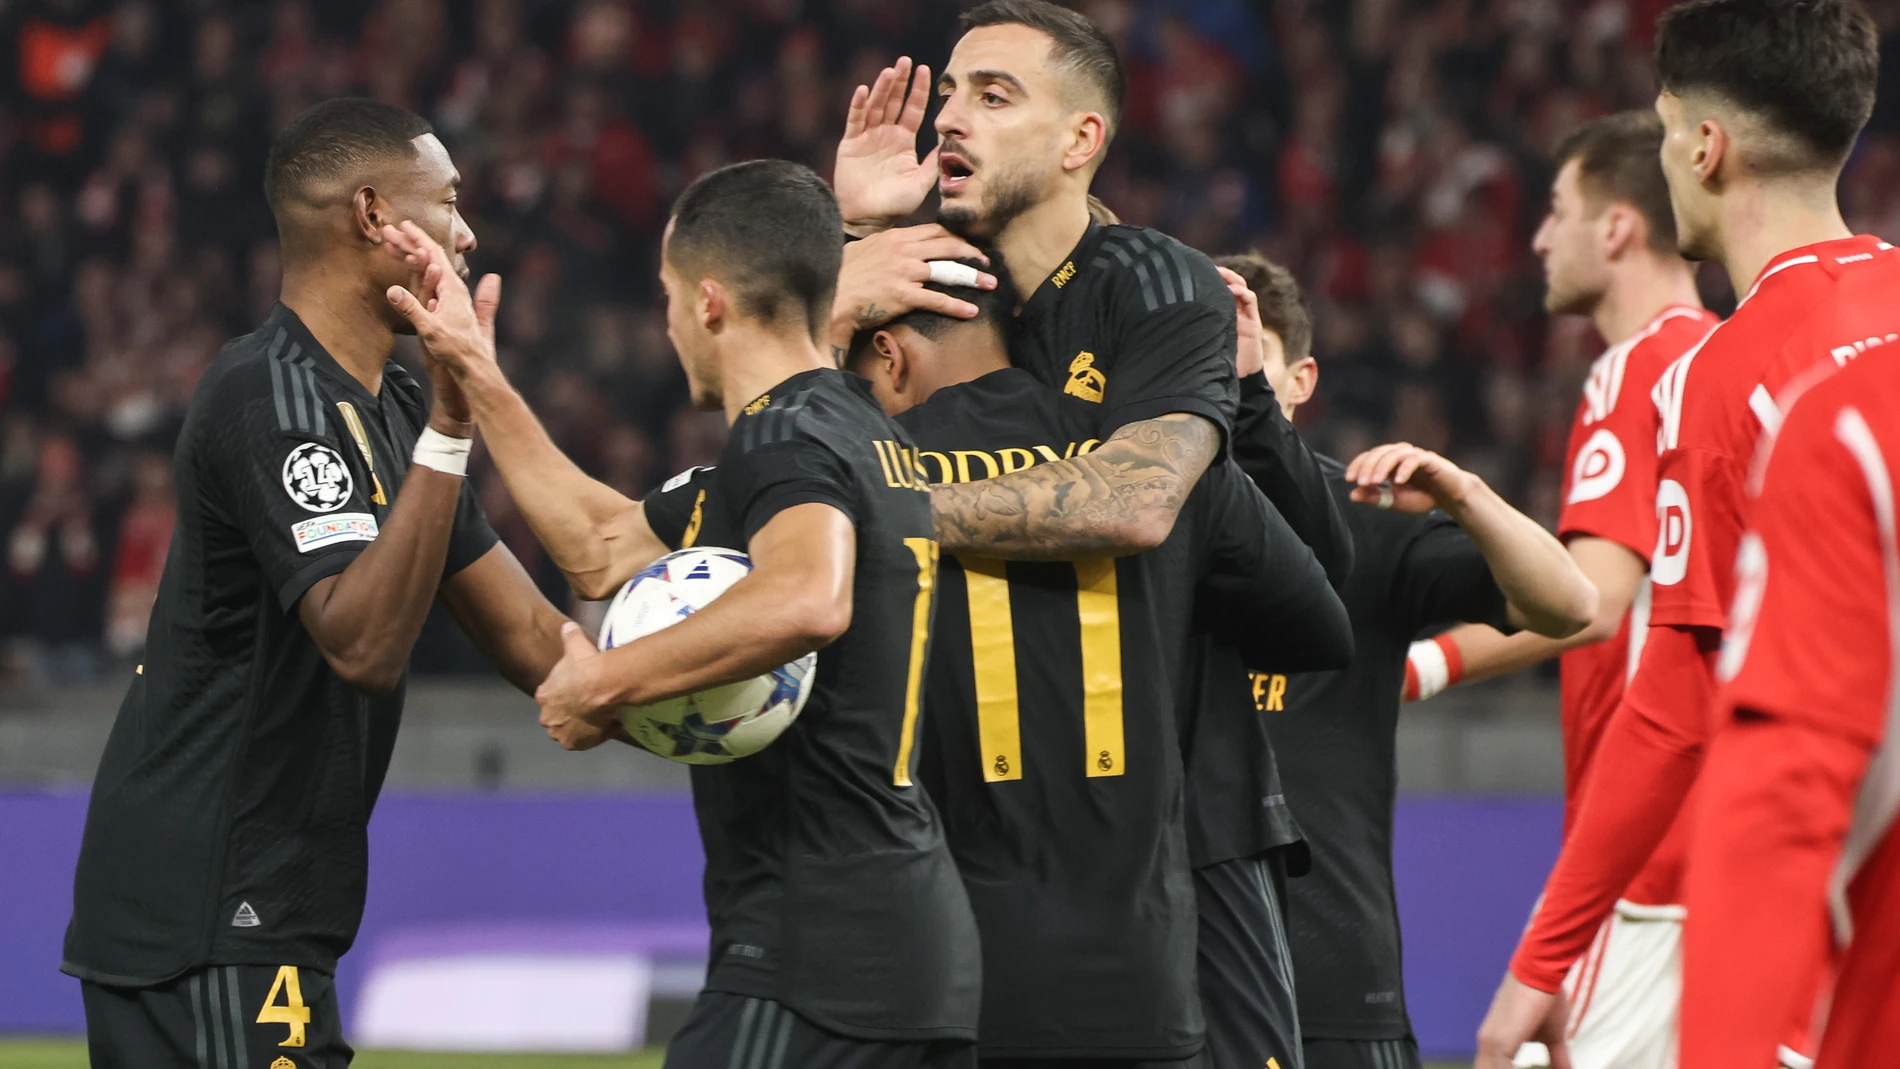 Berlin (Gemany), 12/12/2023.- Madrid's Joselu celebrates with team mates after scoring a goal during the UEFA Champions League group stage match between Union Berlin and Real Madrid, in Berlin, Germany, 12 December 2023. (Liga de Campeones, Alemania) EFE/EPA/CLEMENS BILAN 